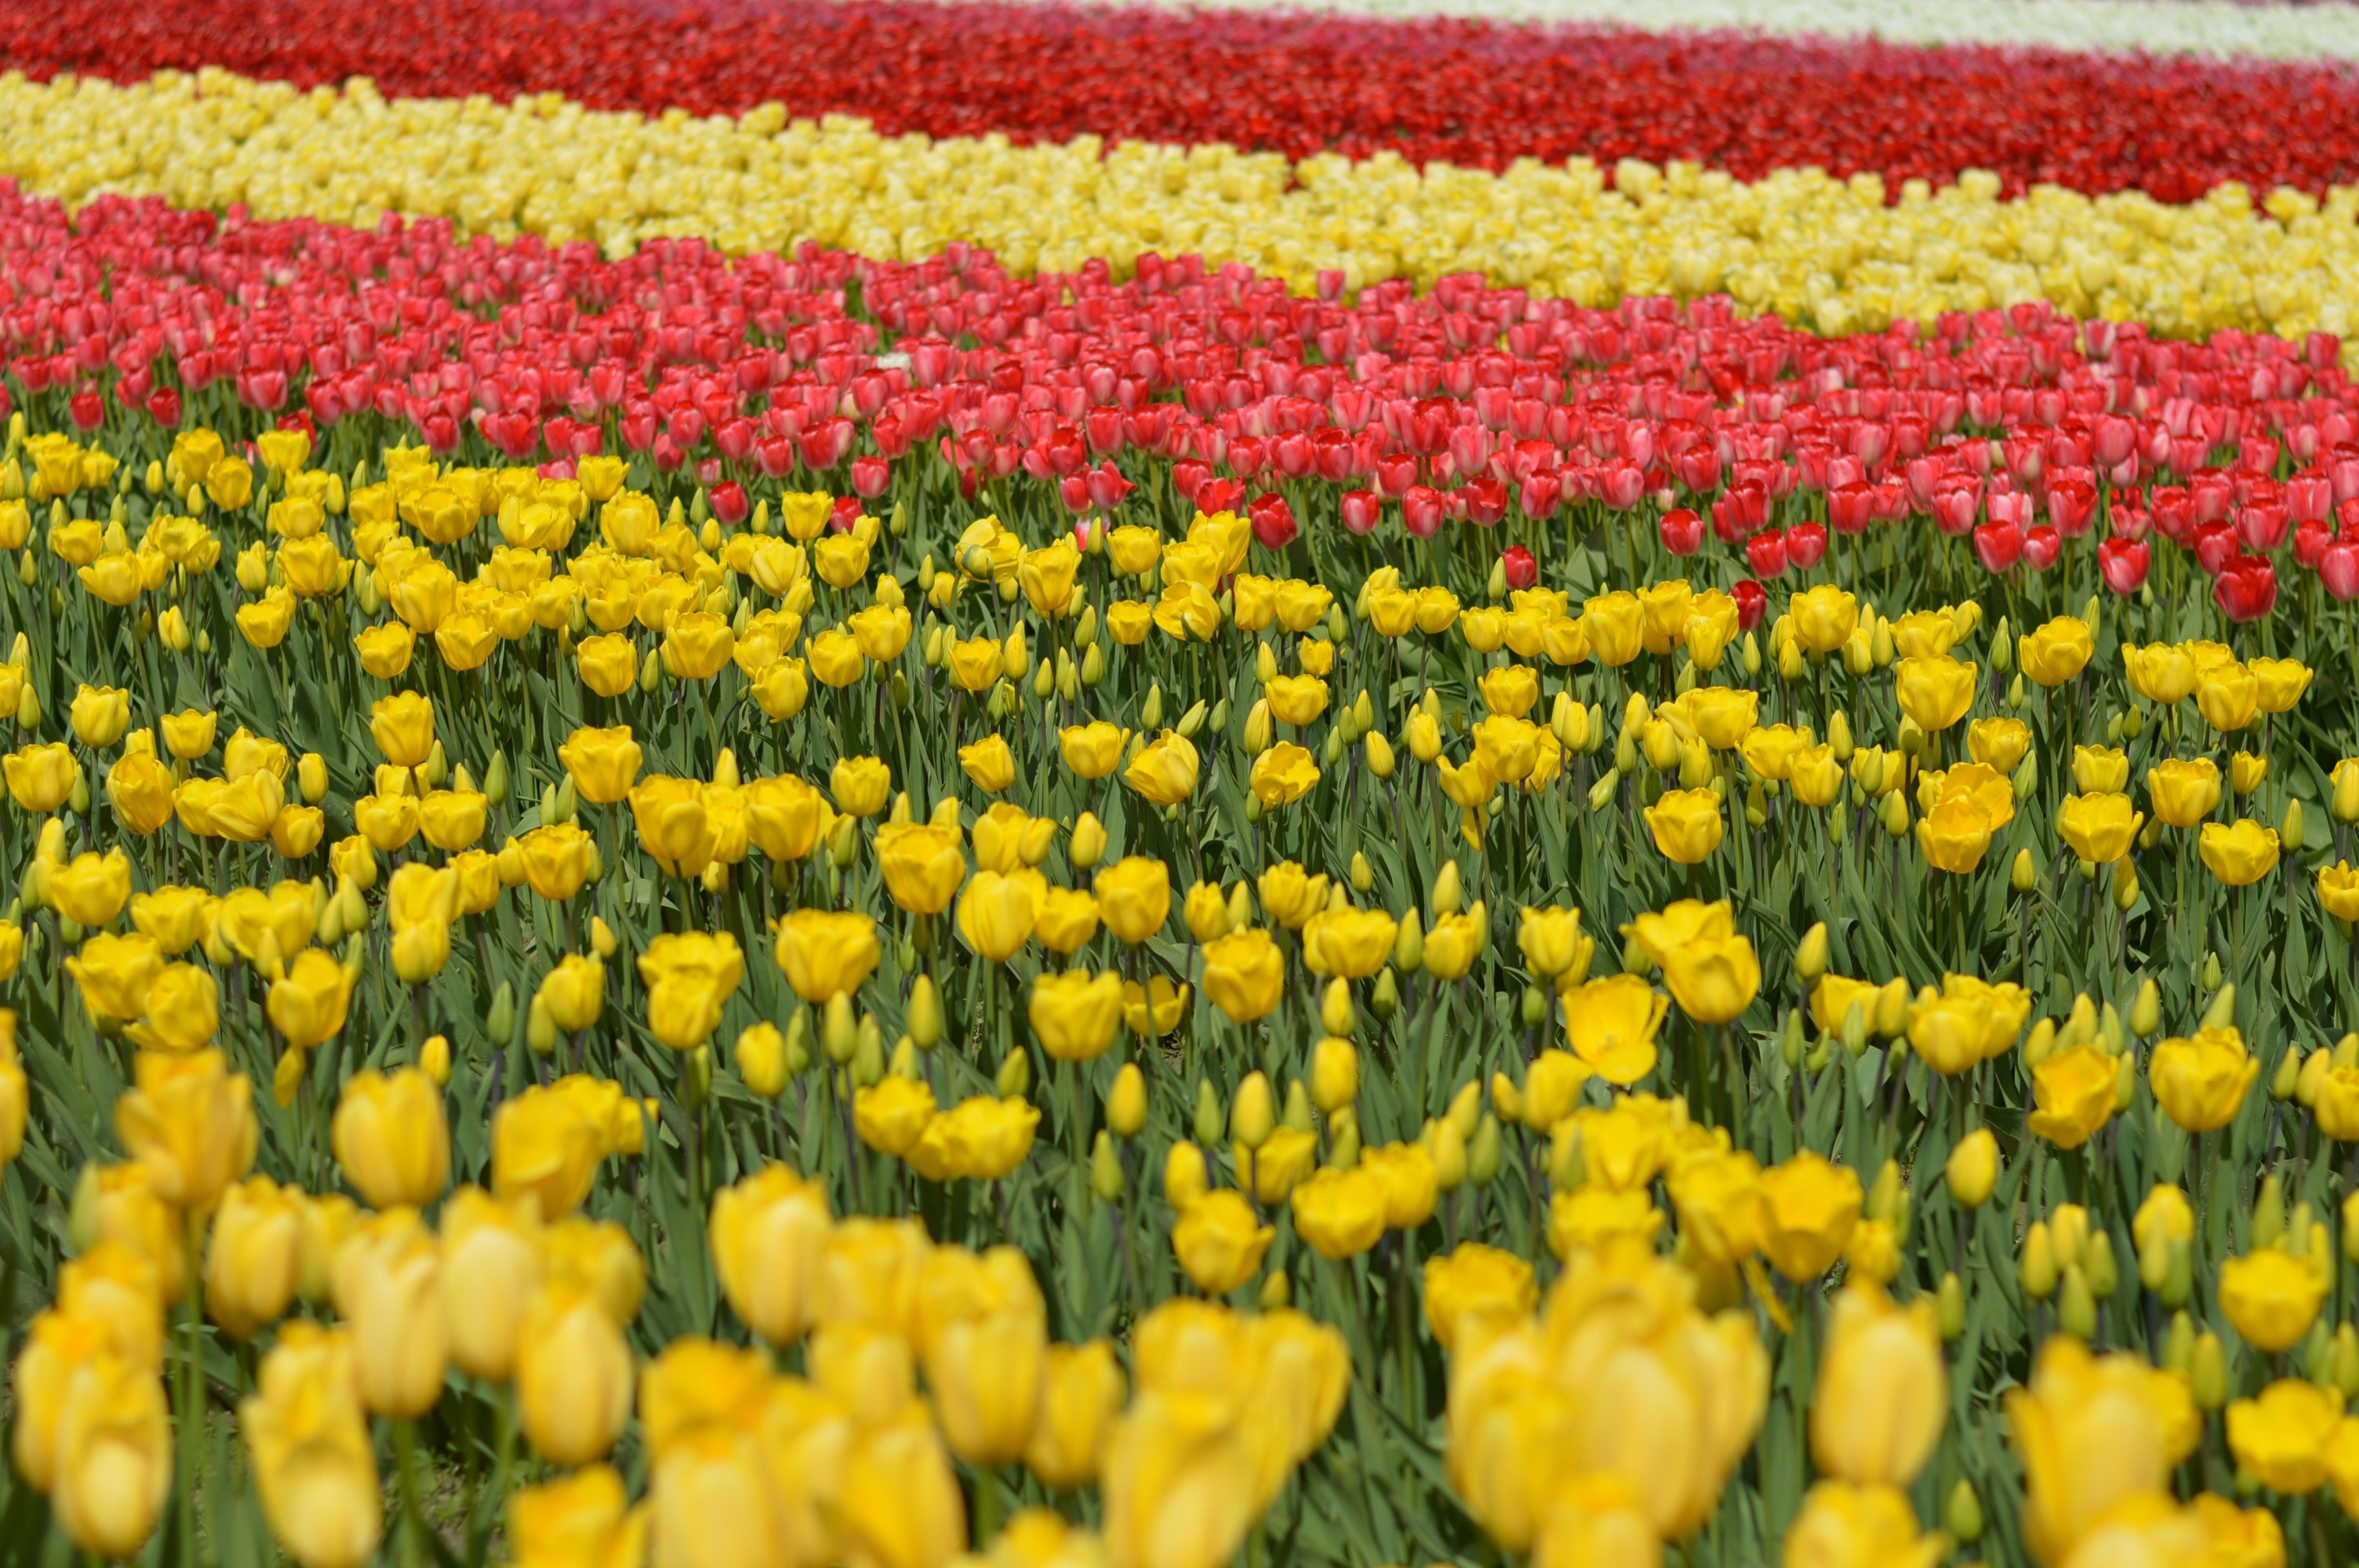 Spring, Nature, Tulips, Stem, Flower, yellow, agriculture